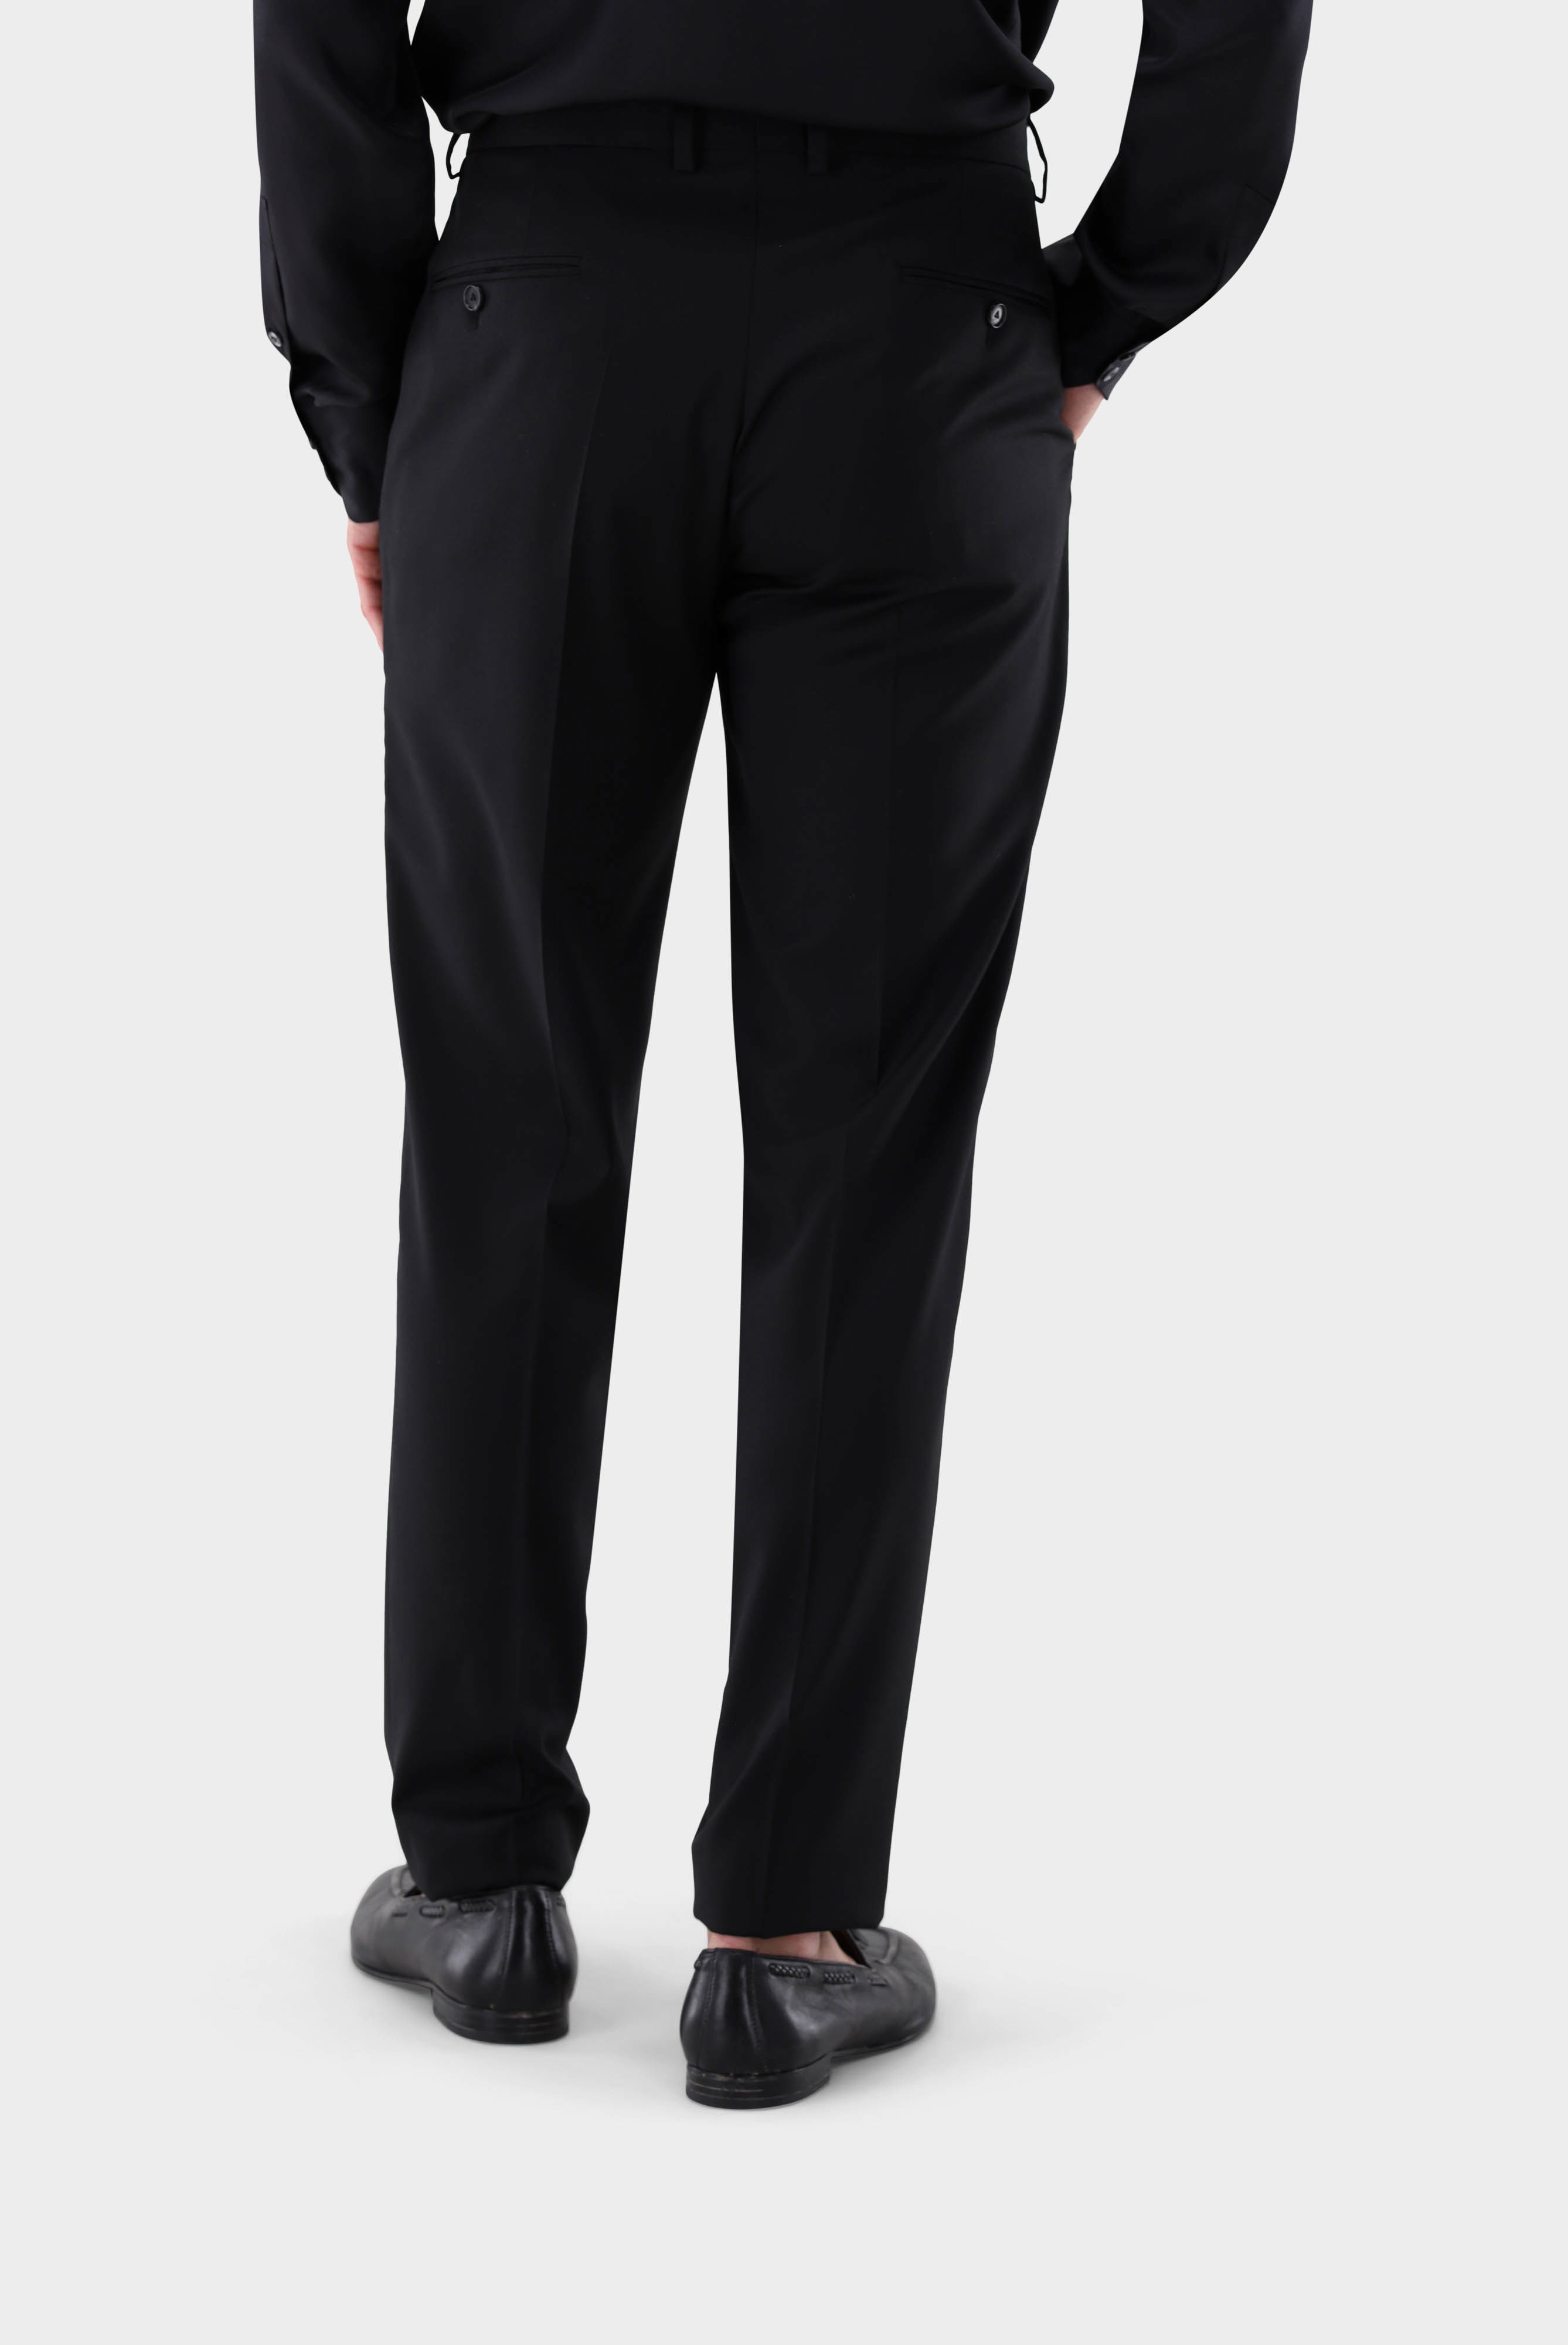 Jeans & Trousers+Wool Trousers Slim Fit+20.7880.16.H01010.099.94